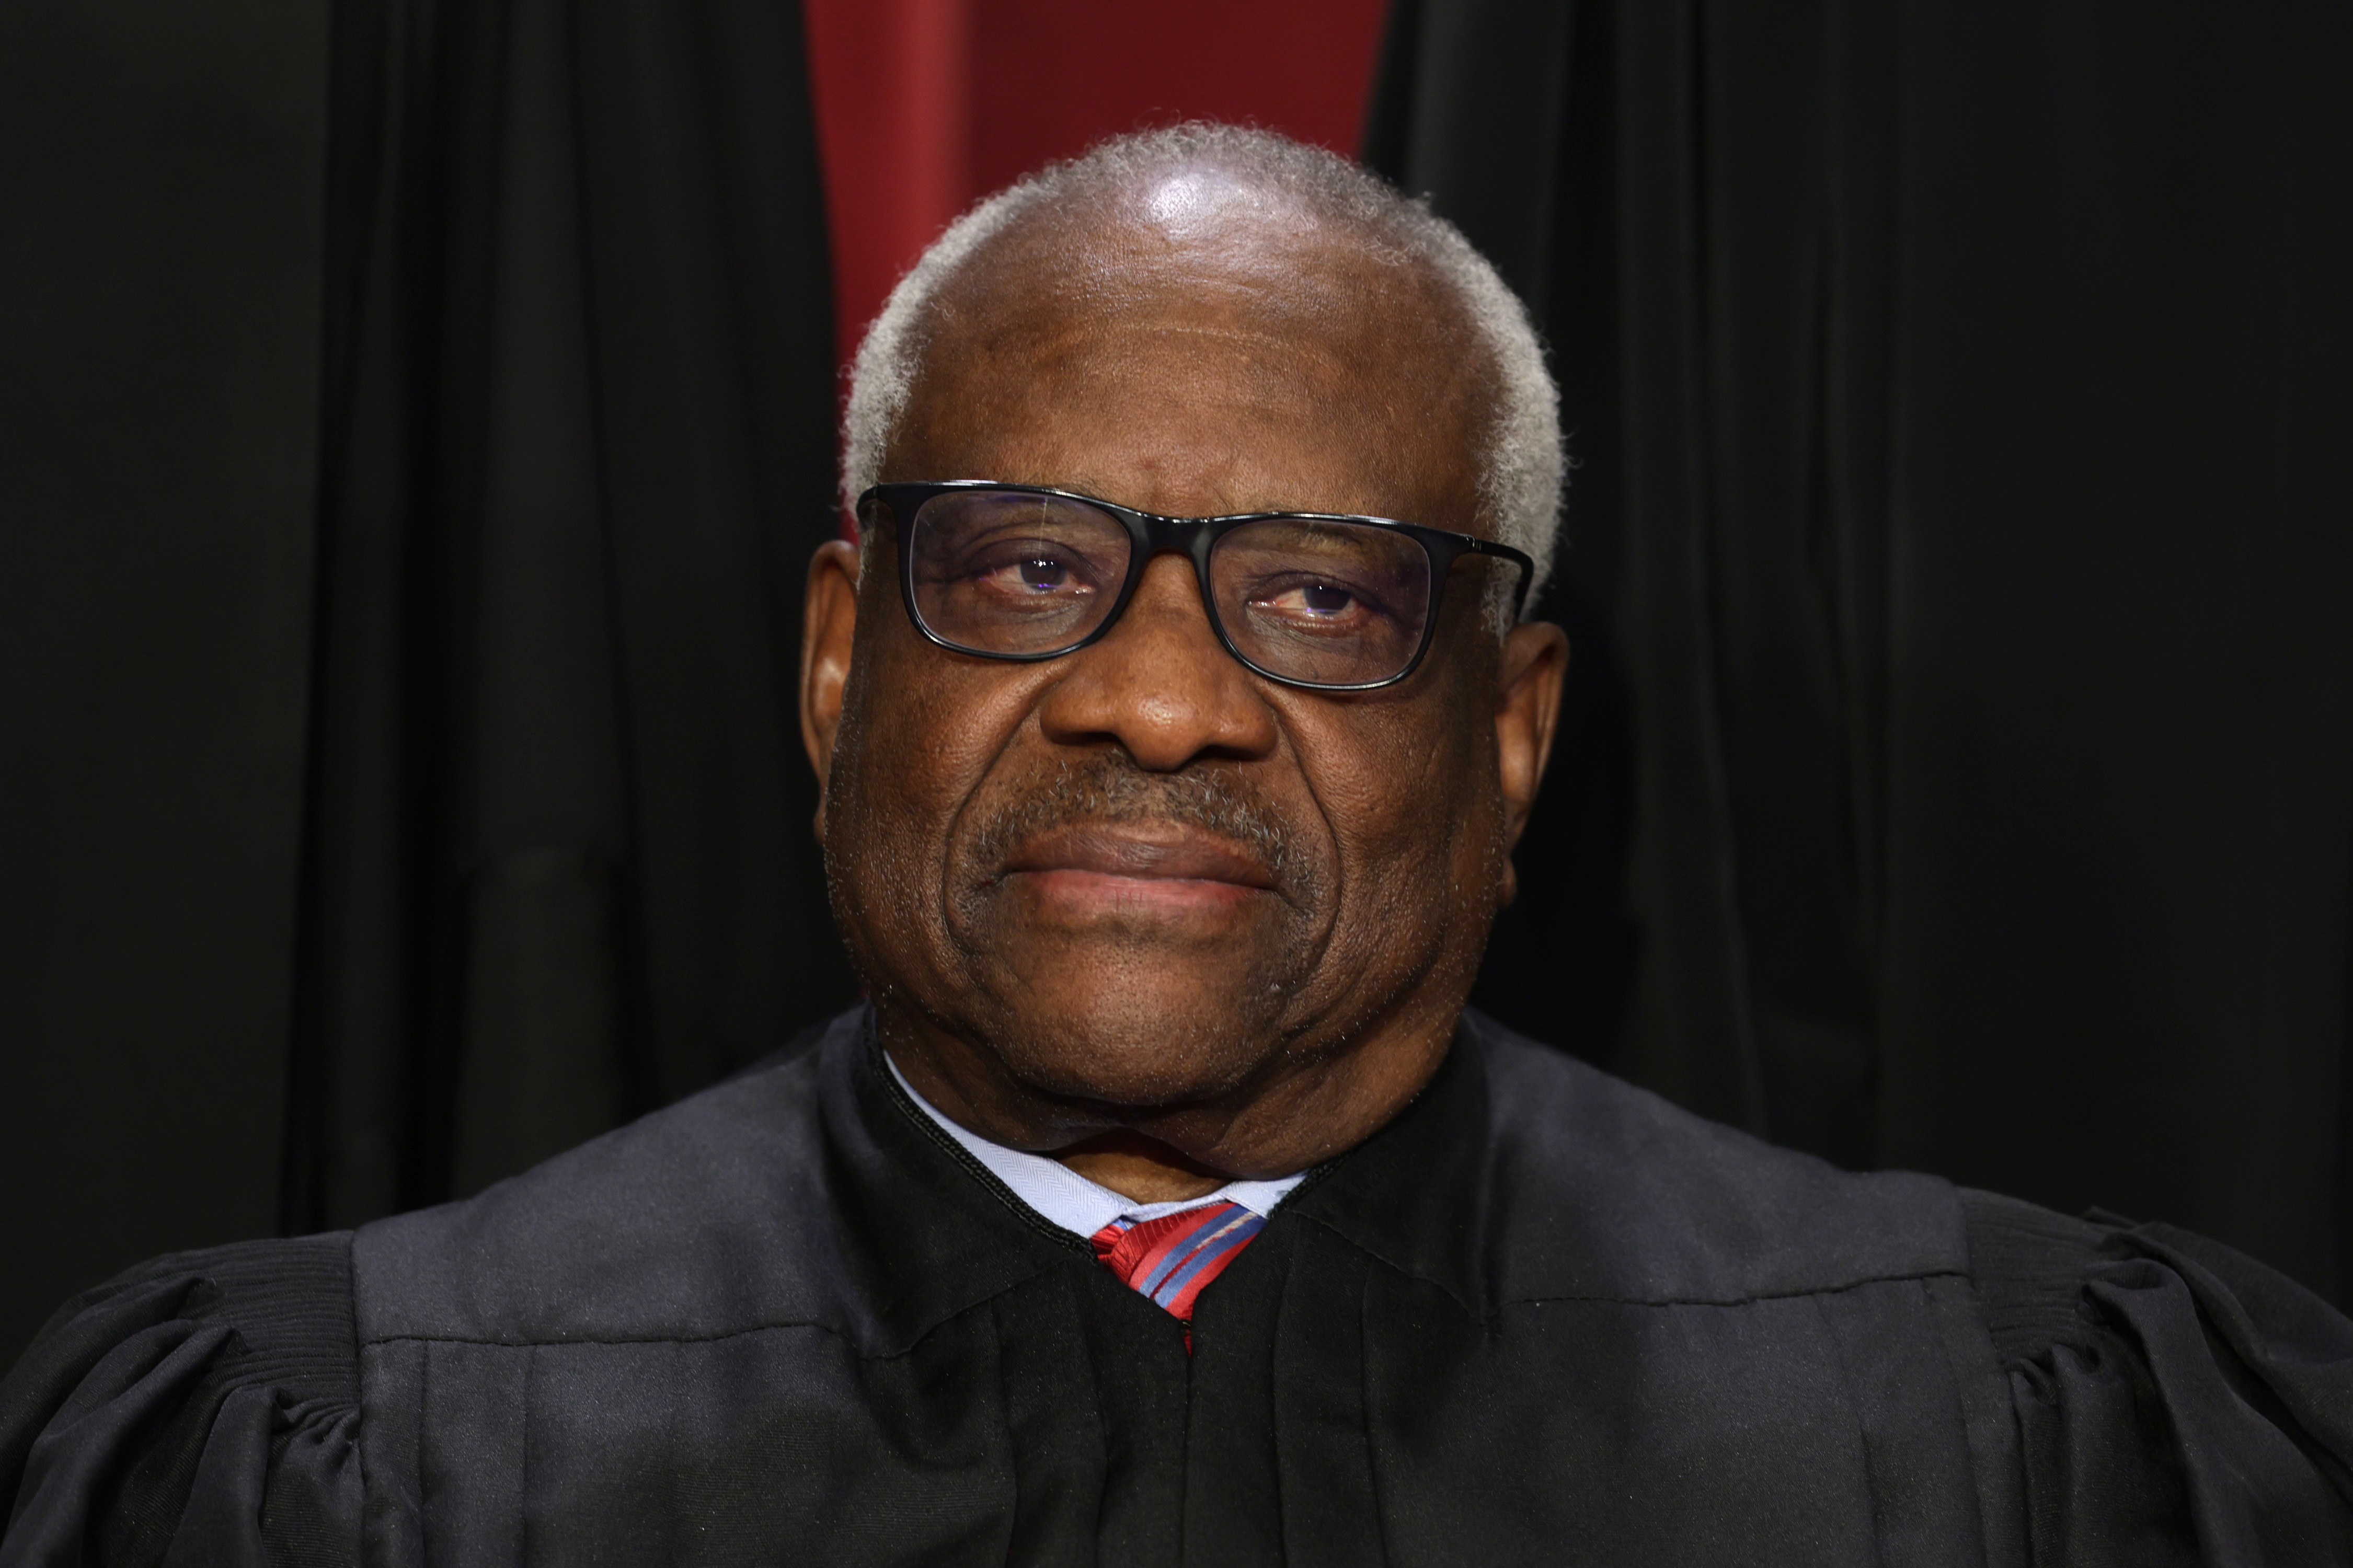 Justice Clarence Thomas poses for an official portrait at the Supreme Court in Washington, DC, in 2022.